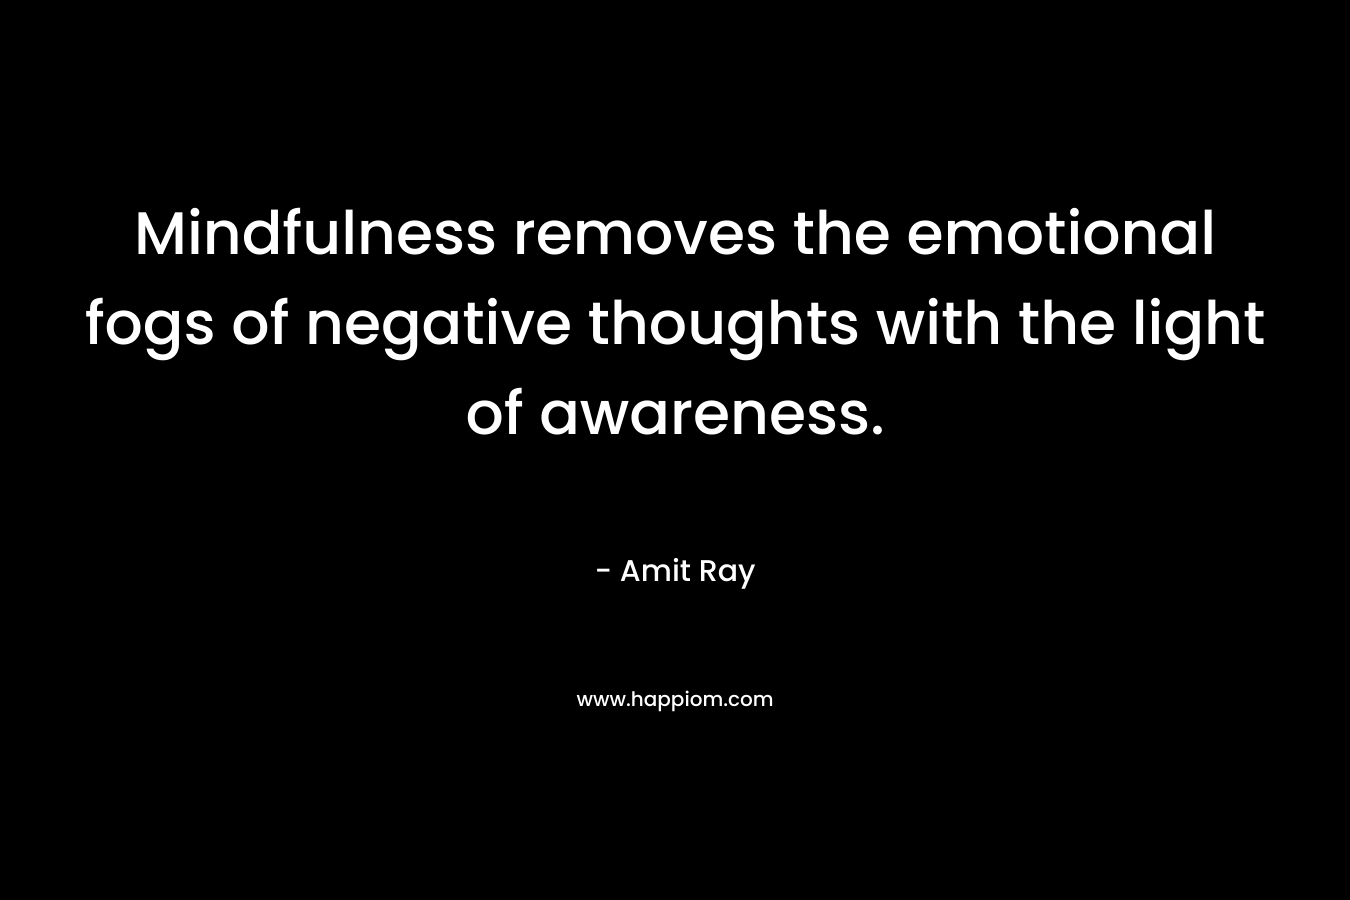 Mindfulness removes the emotional fogs of negative thoughts with the light of awareness.